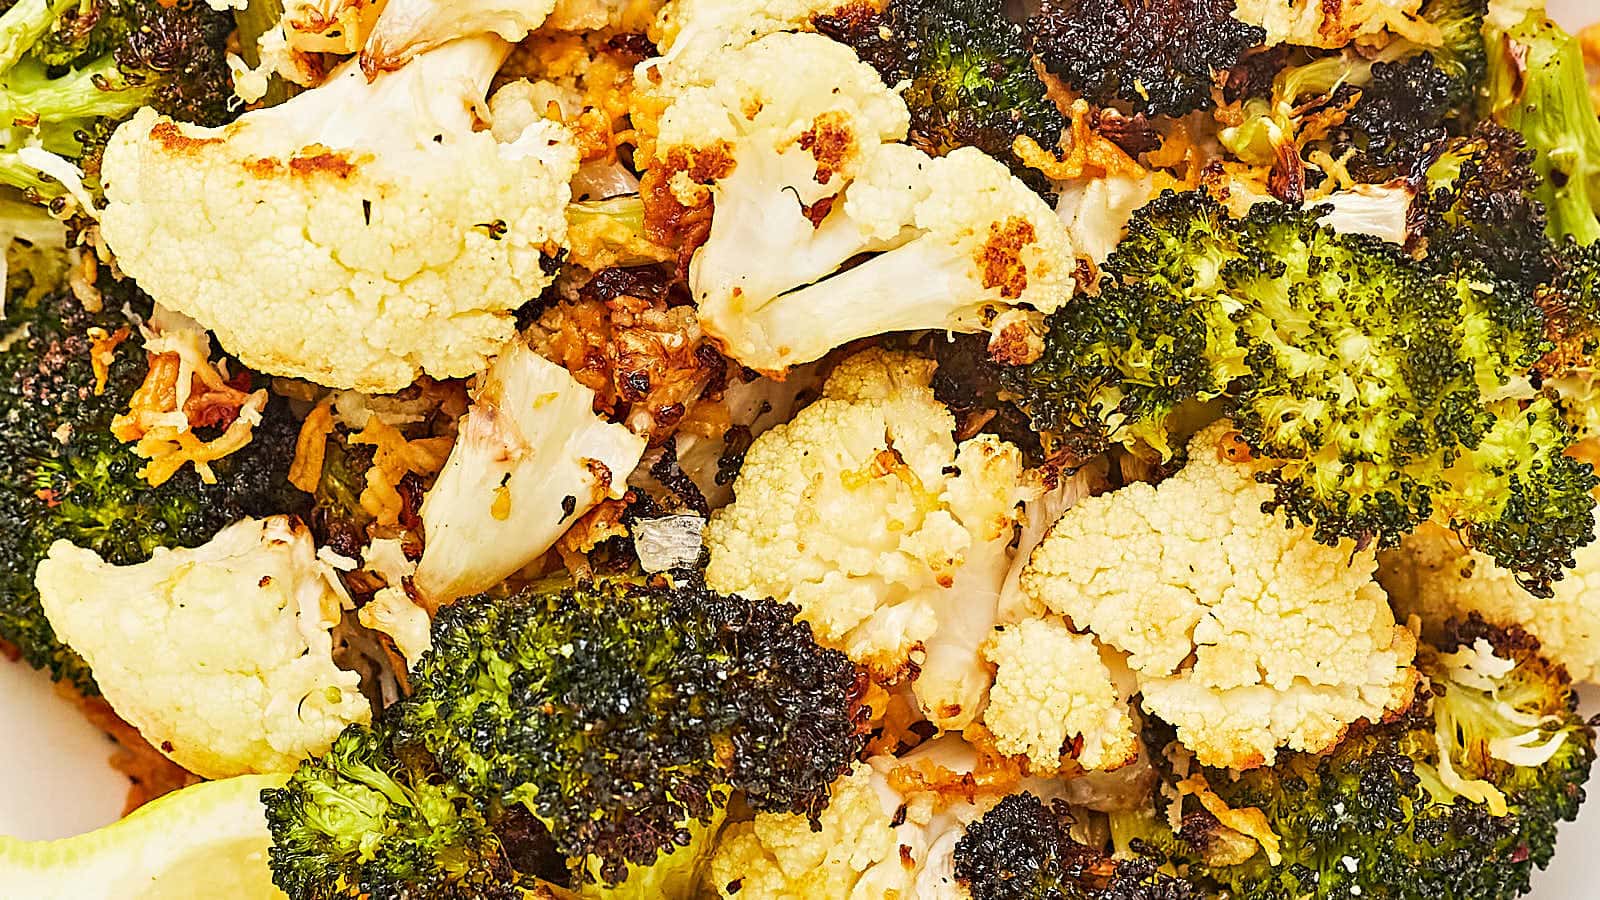 Roasted Broccoli And Cauliflower recipe by Cheerful Cook.